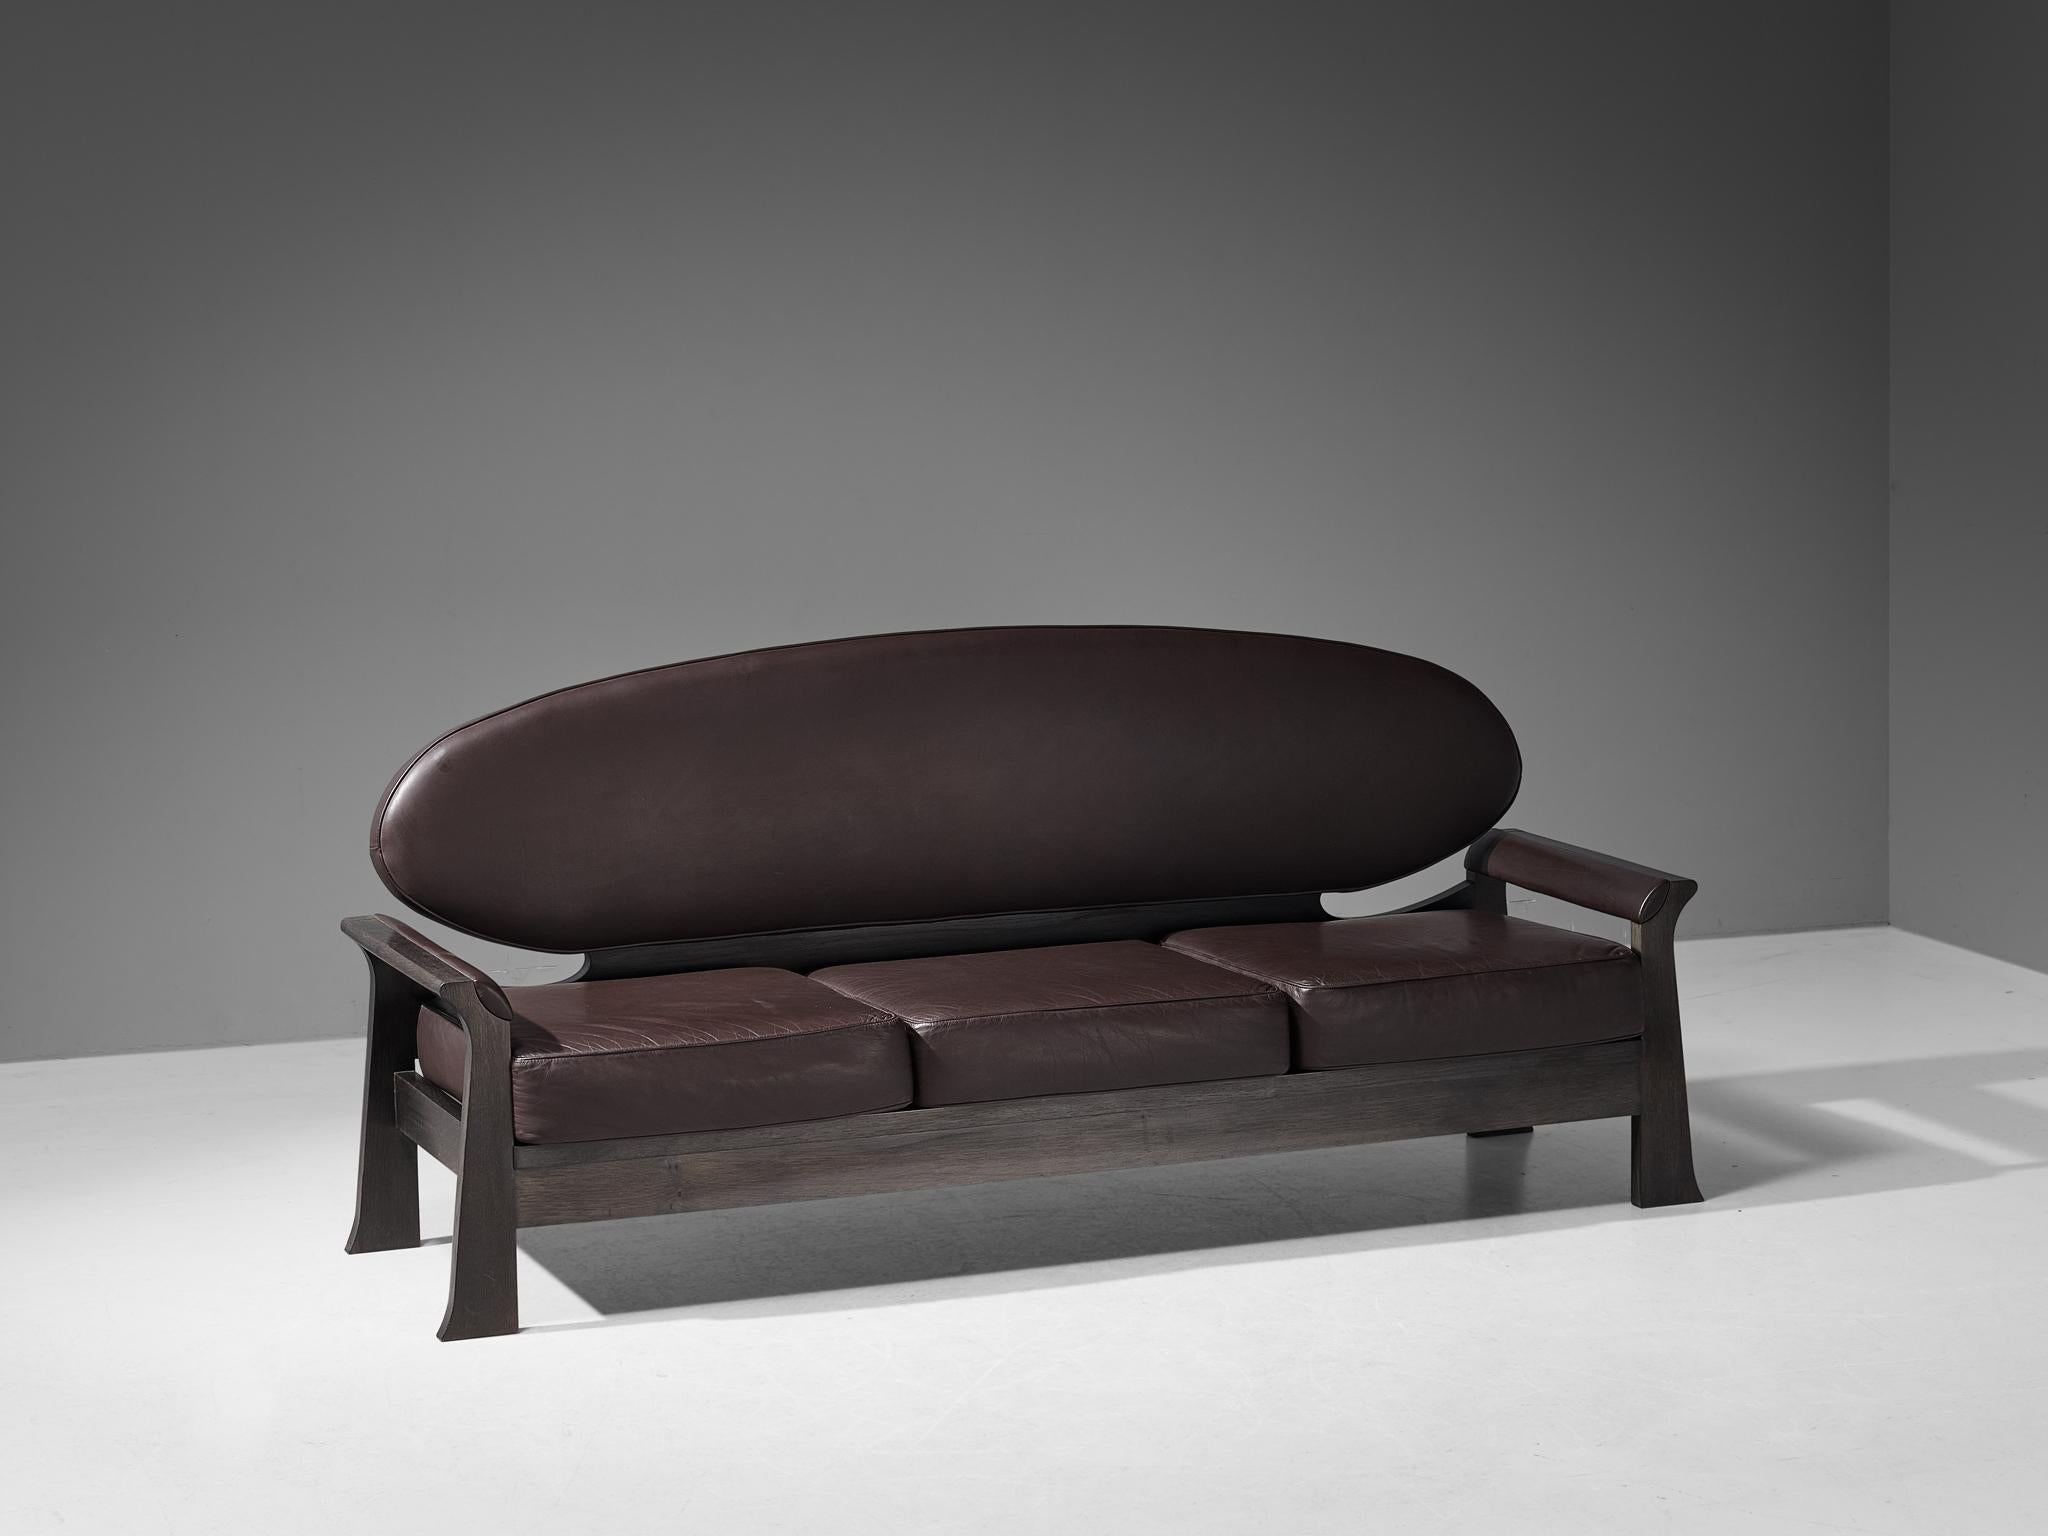 Emiel Veranneman for De Coene, 'Osaka' sofa, stained oak, leather, Belgium 1968.

The Belgian designer Emiel Veranneman is a specialist in balancing decorative and structural components in furniture, and this sofa is a prime example of that. In